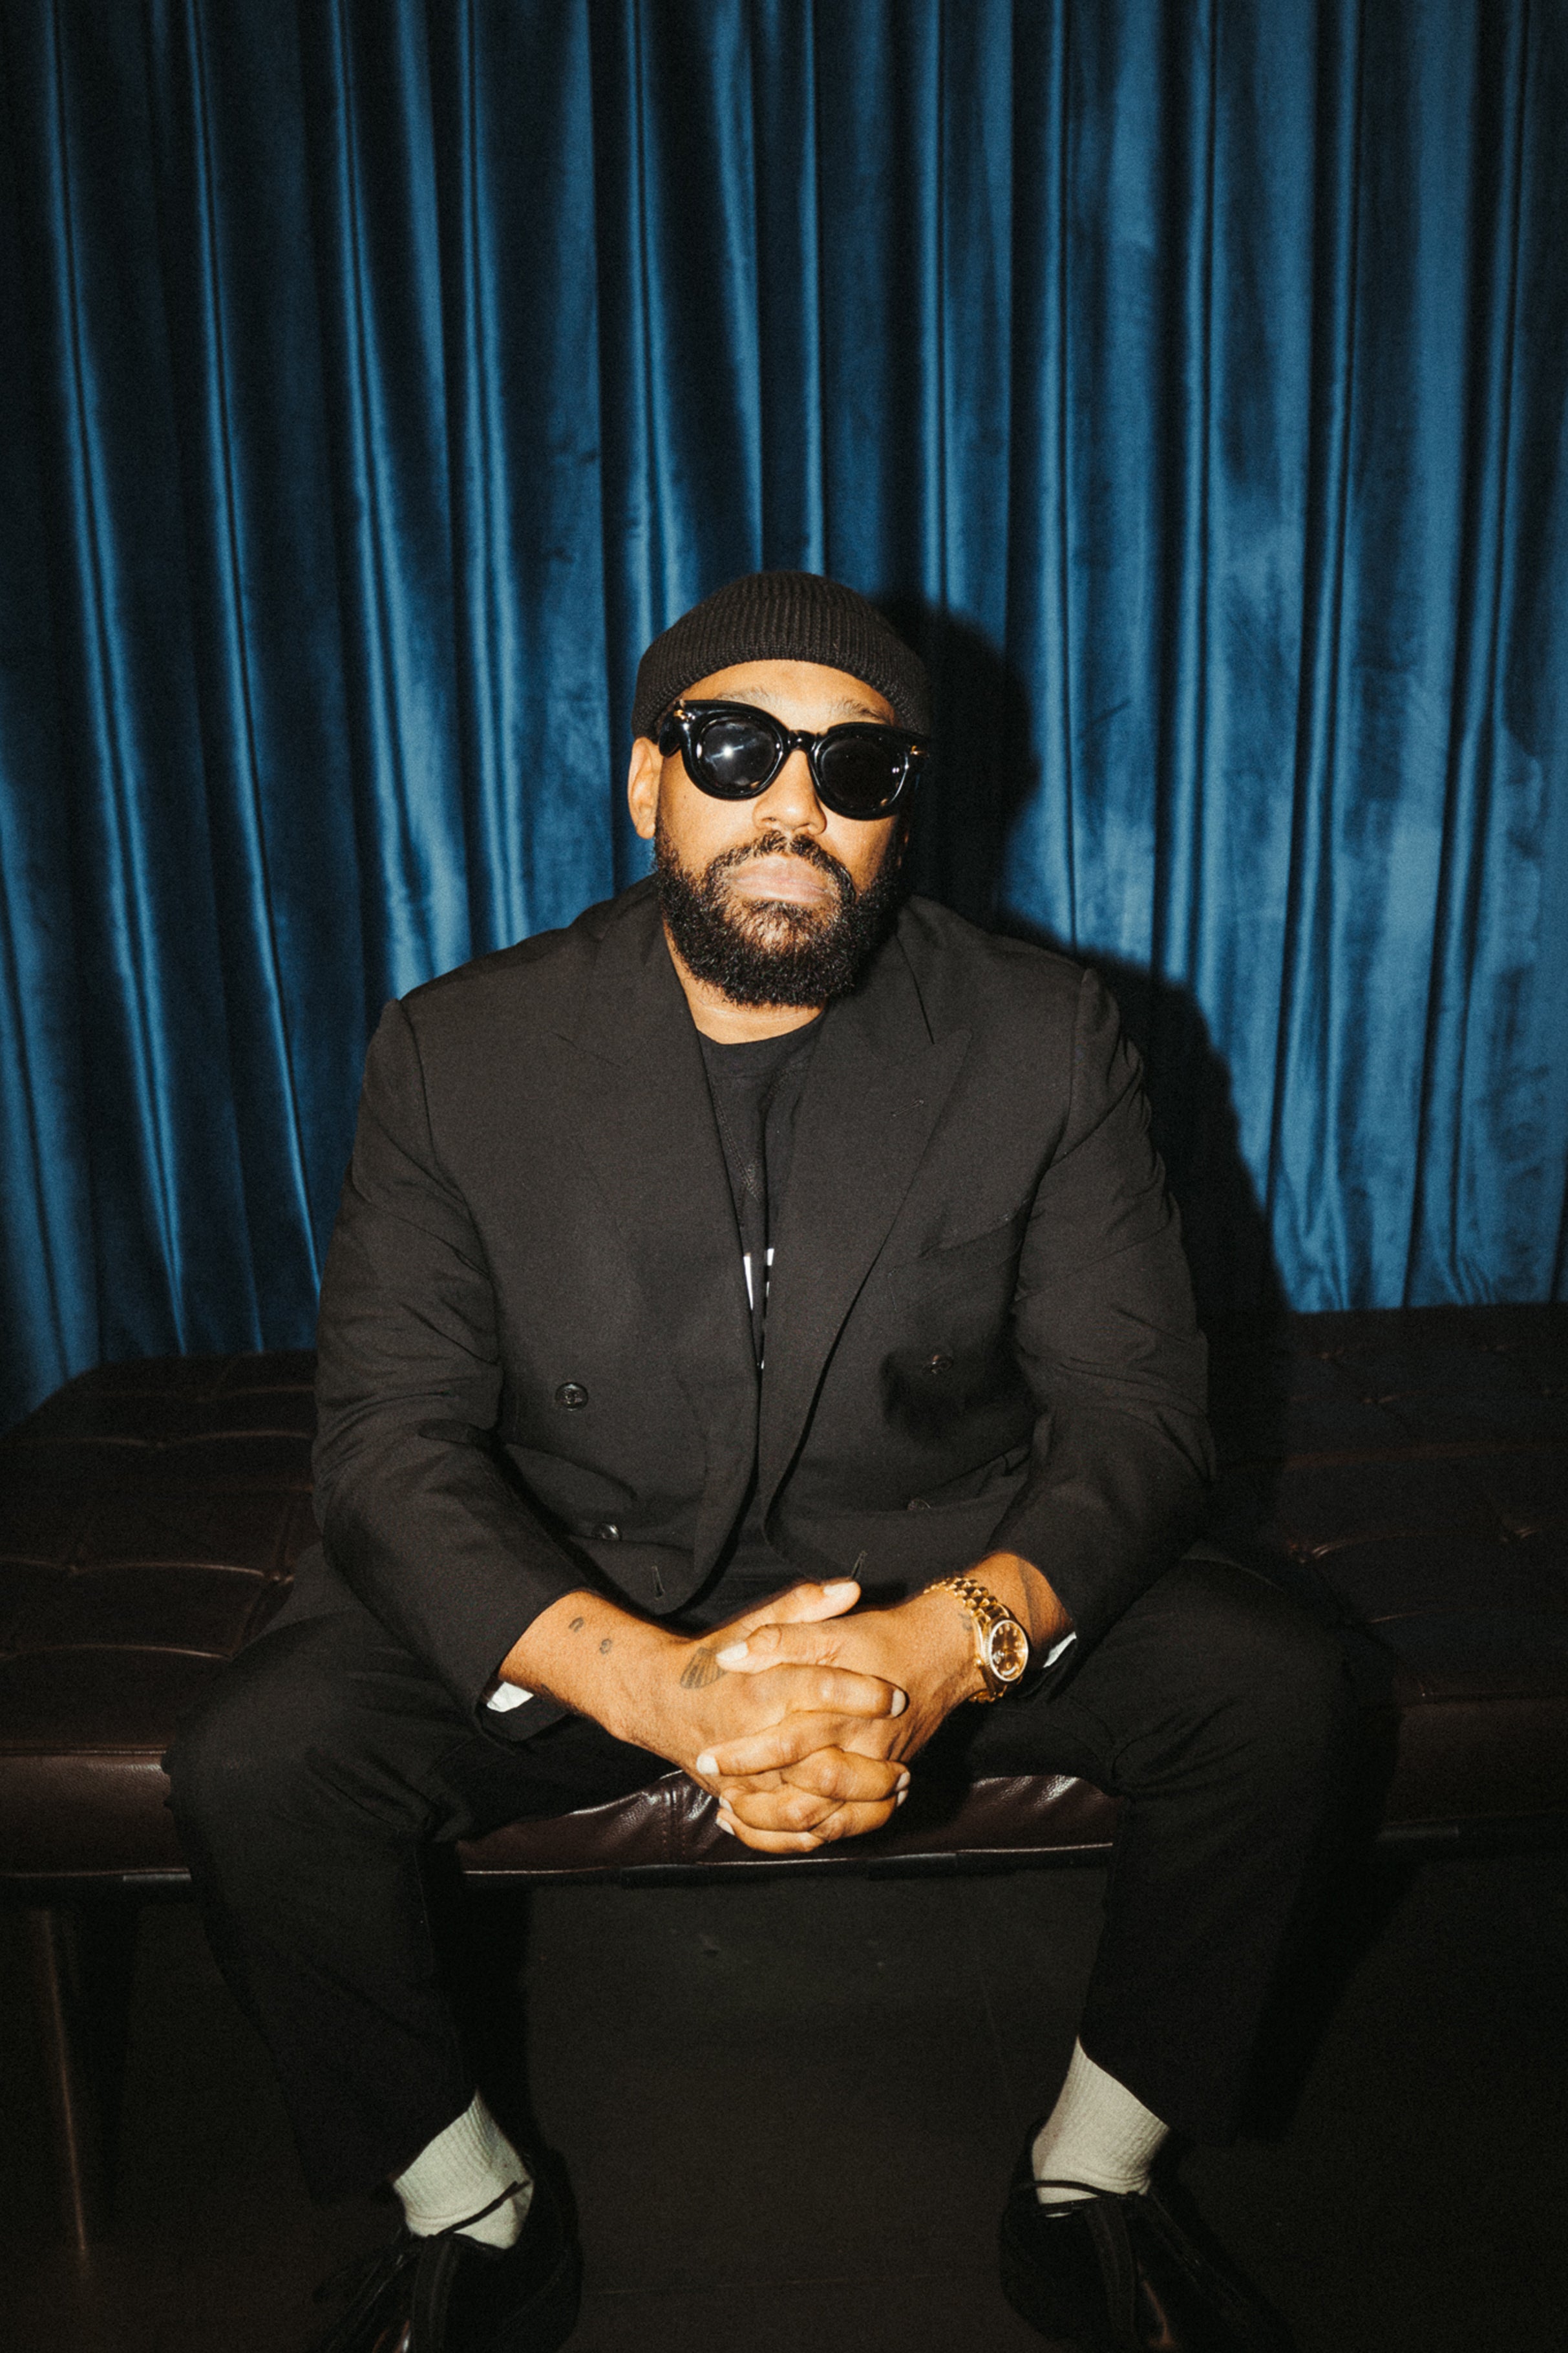 exclusive presale code to PJ Morton - Cape Town to Cairo Tour face value tickets in Chicago at The Chicago Theatre